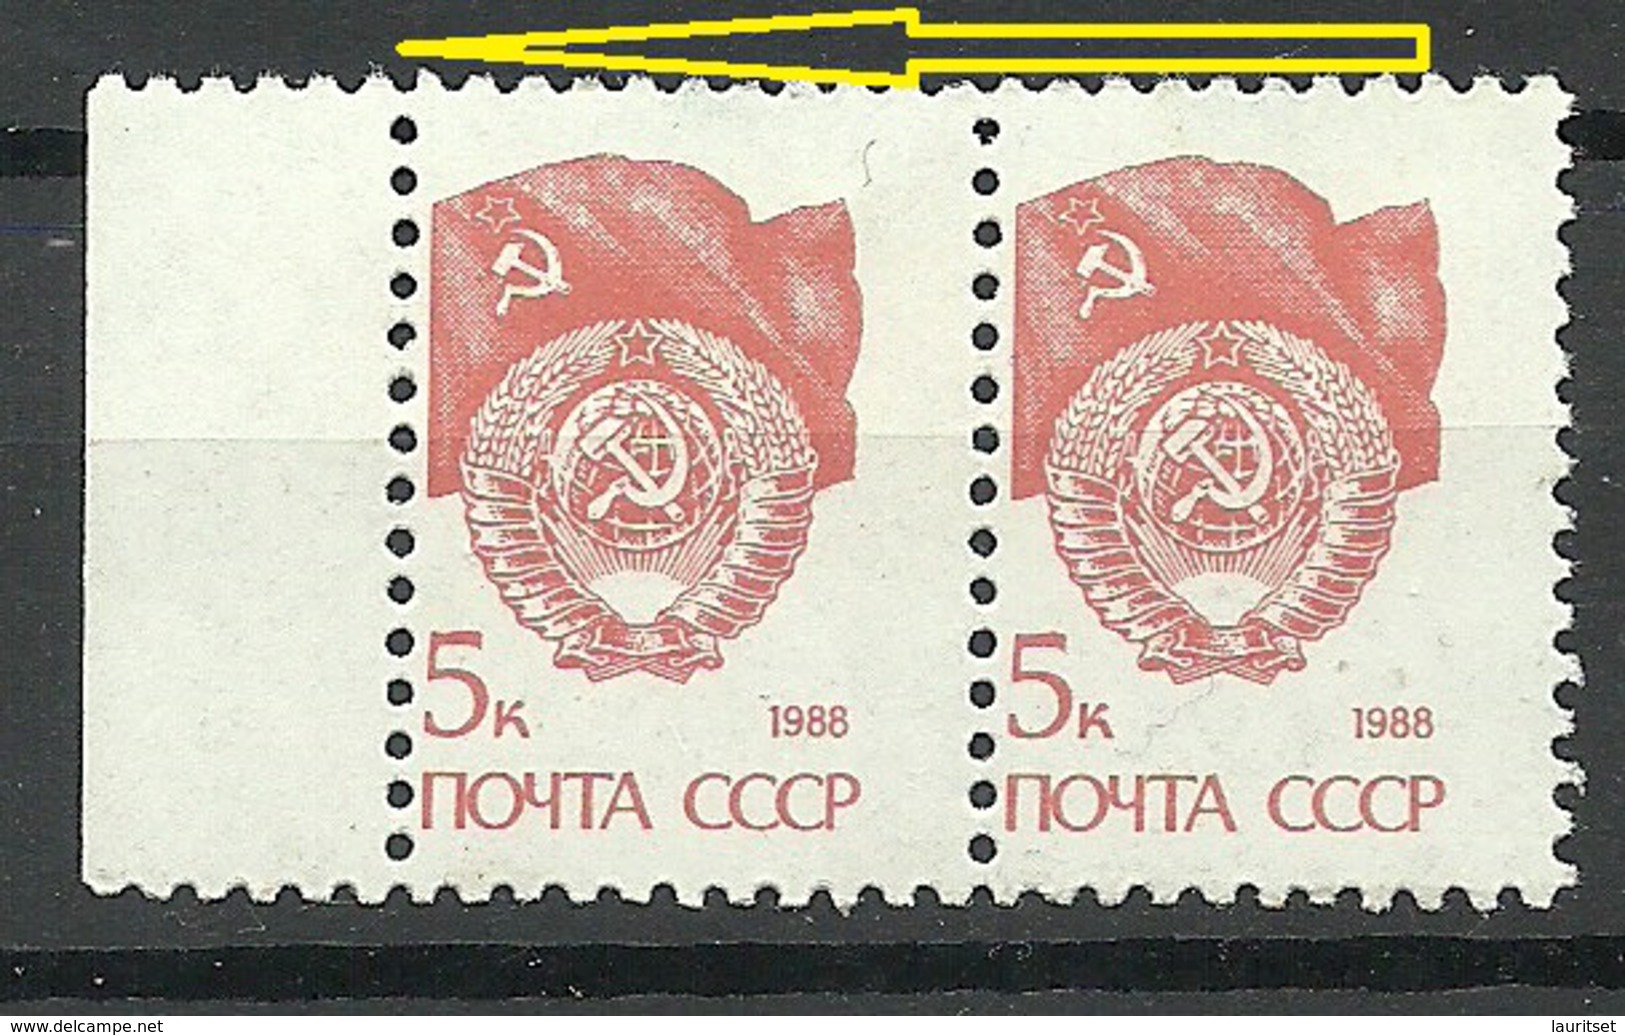 RUSSLAND RUSSIA 1988 Michel 5897 In Pair MNH/MH ERROR Abart Swifted Perforation - Errors & Oddities